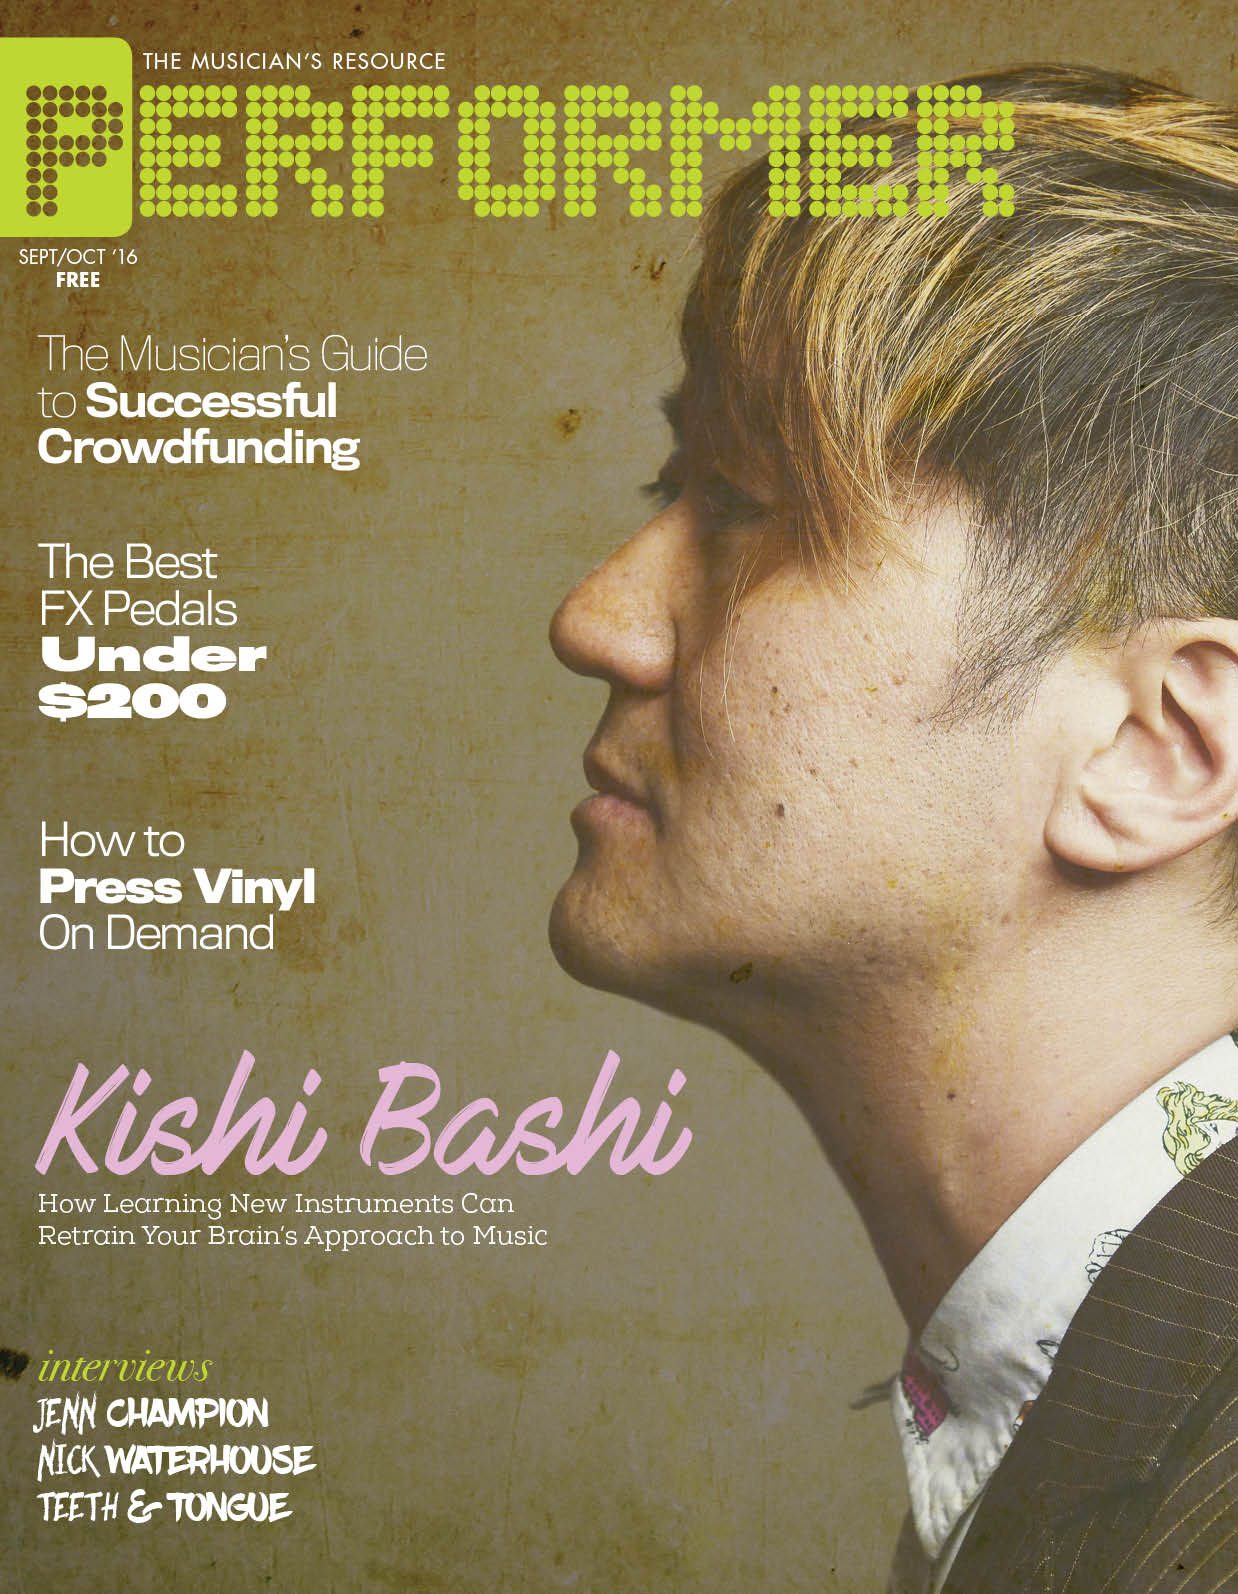 The new issue is out, featuring Kishi Bashi!